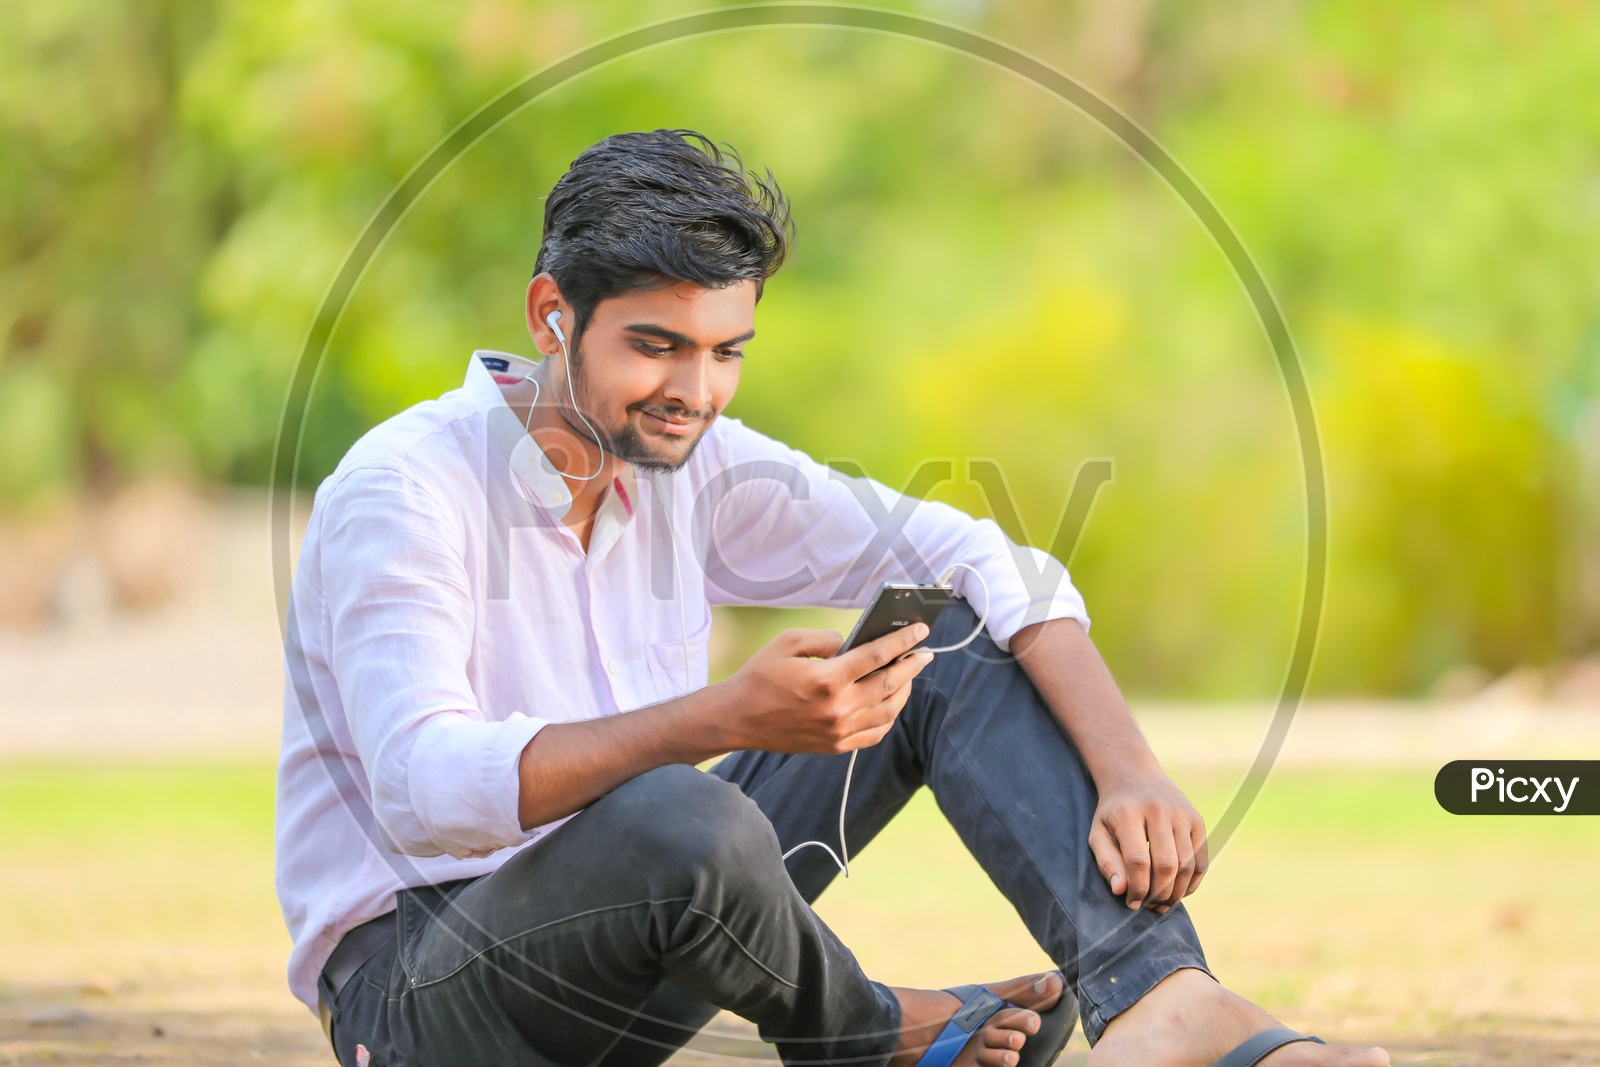 Indian College Student Using In Mobile Or Smartphone